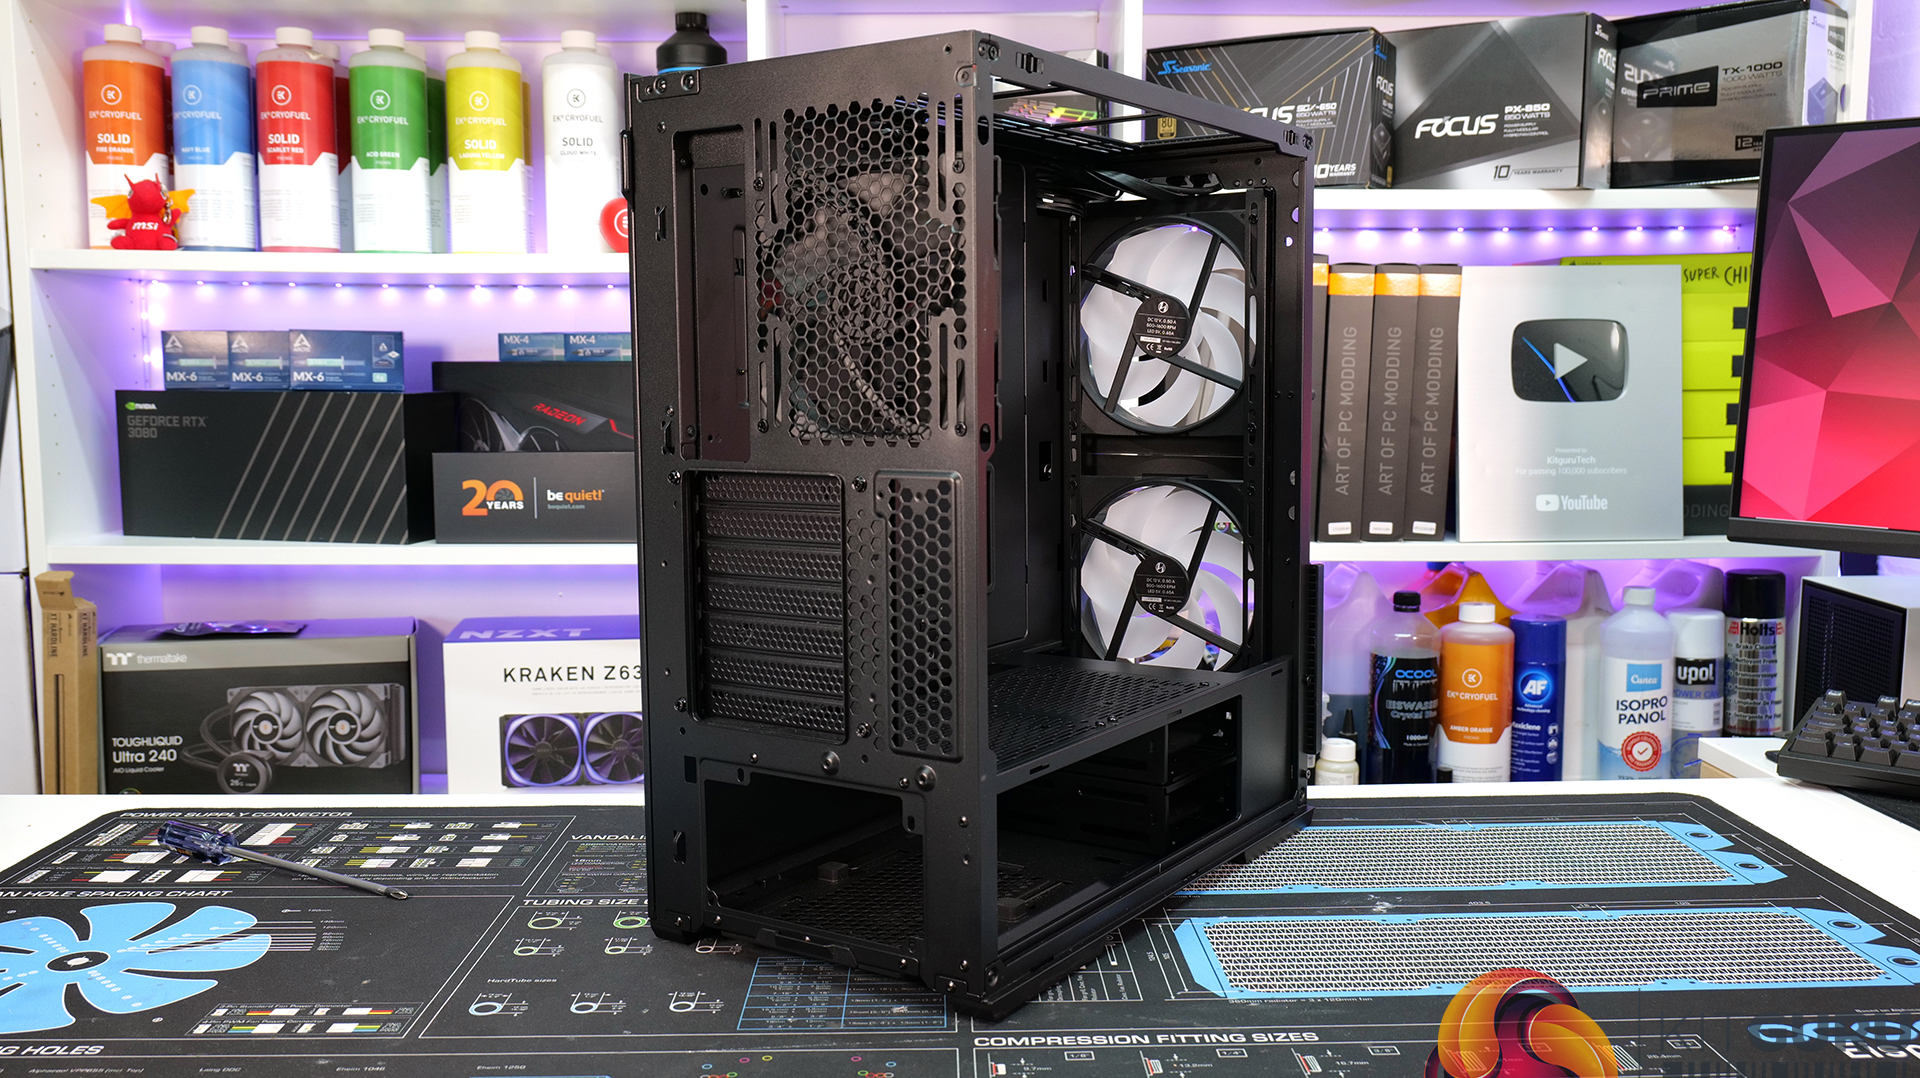 My review of the Lancool 216: an outstanding case with value hard